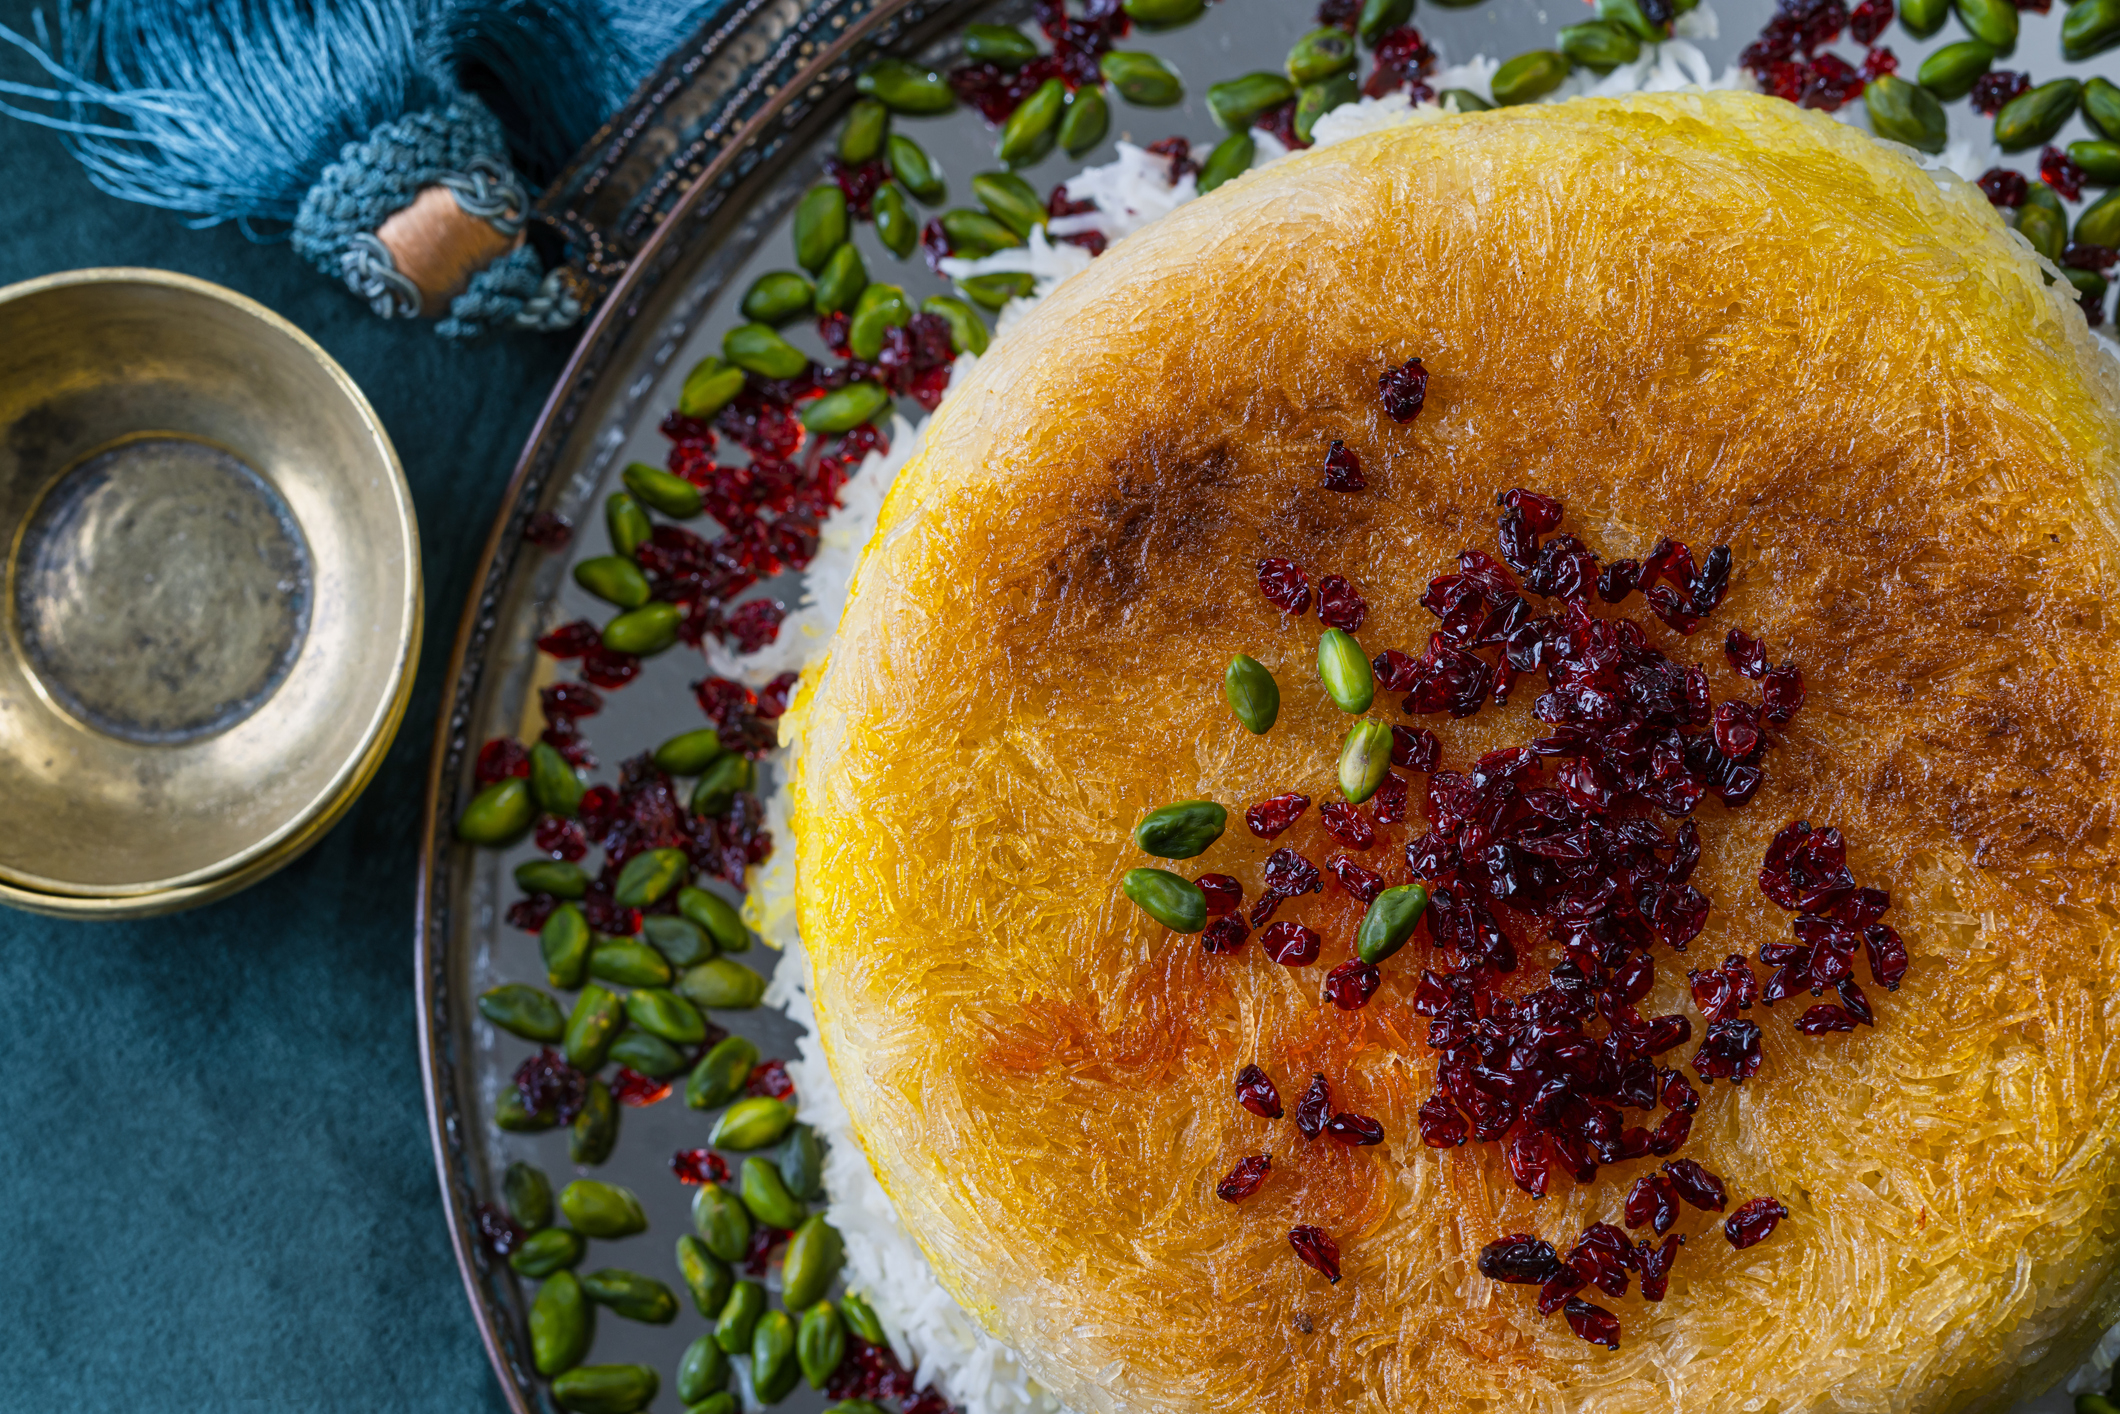 A plate of Persian rice with barberries and pistachios, traditional garnishes